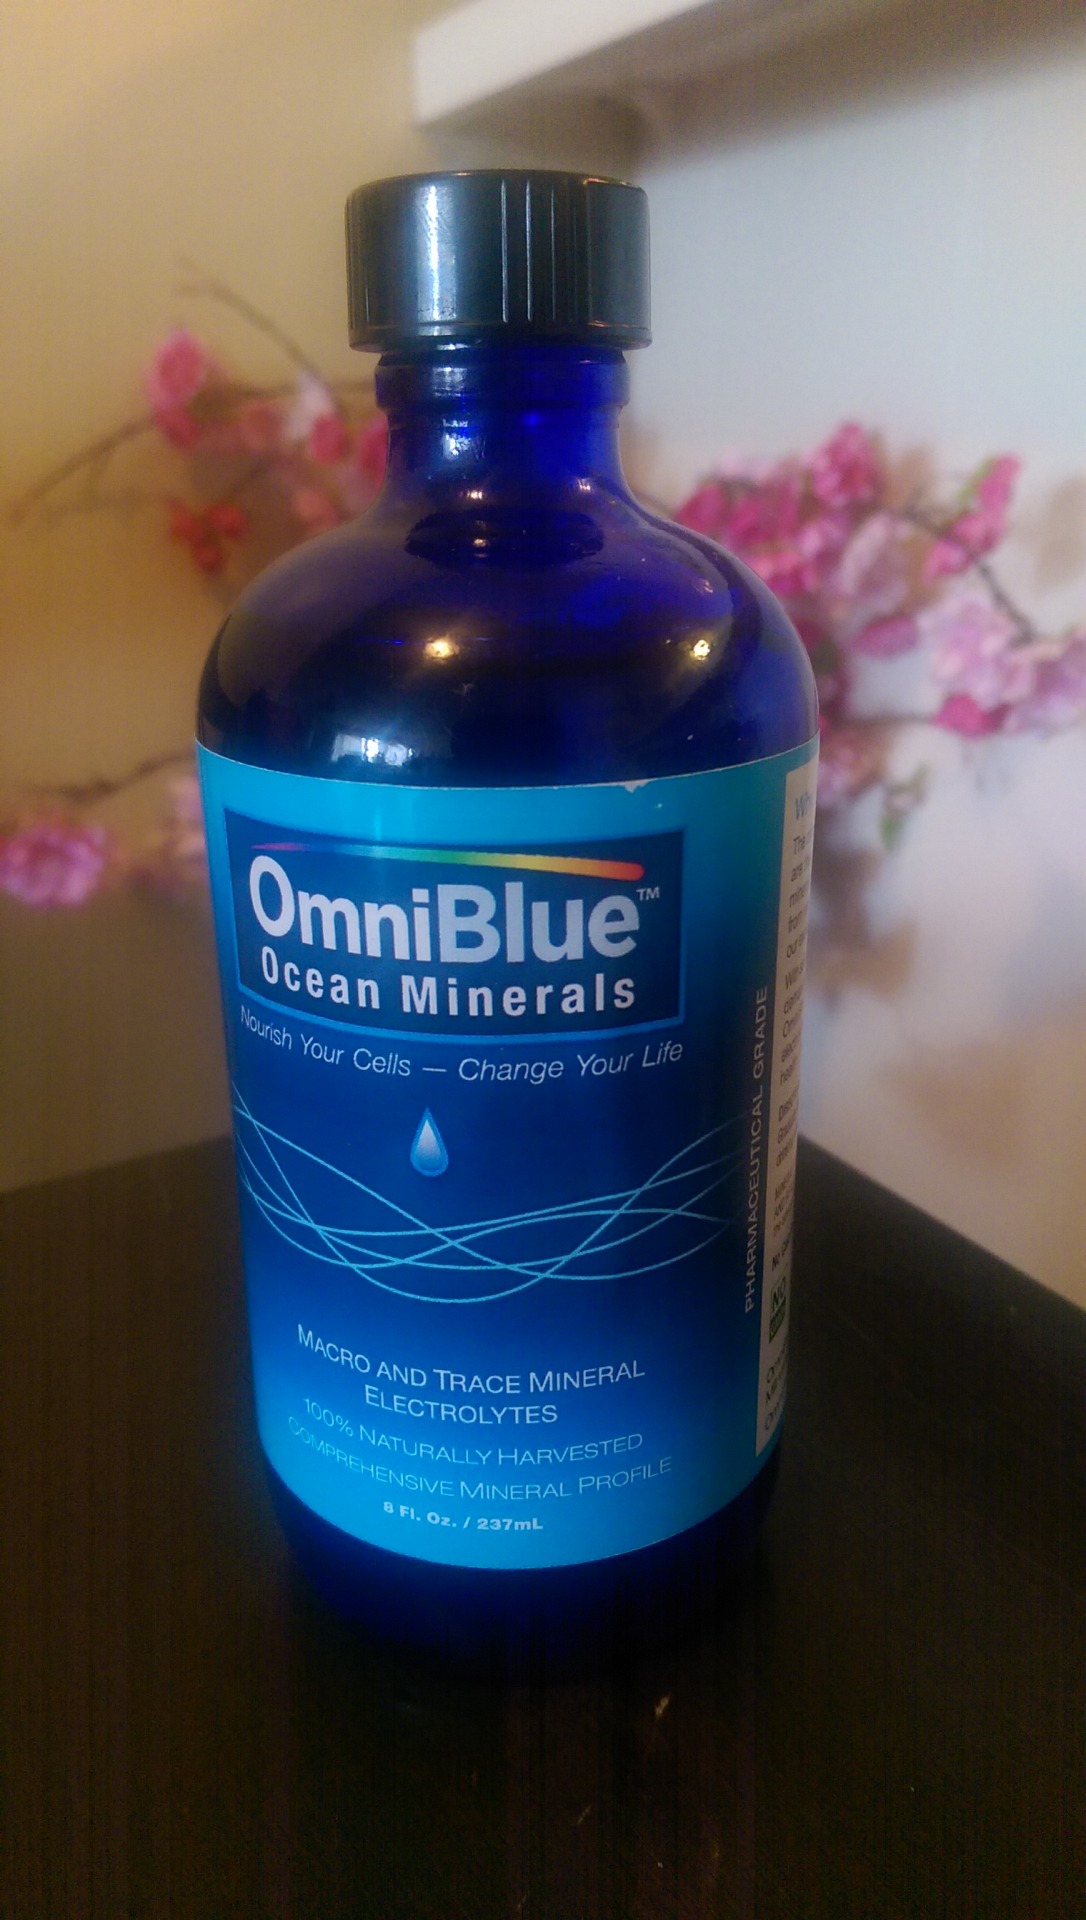 OmniBlue Ocean Minerals — Happy Valentine’s Day from